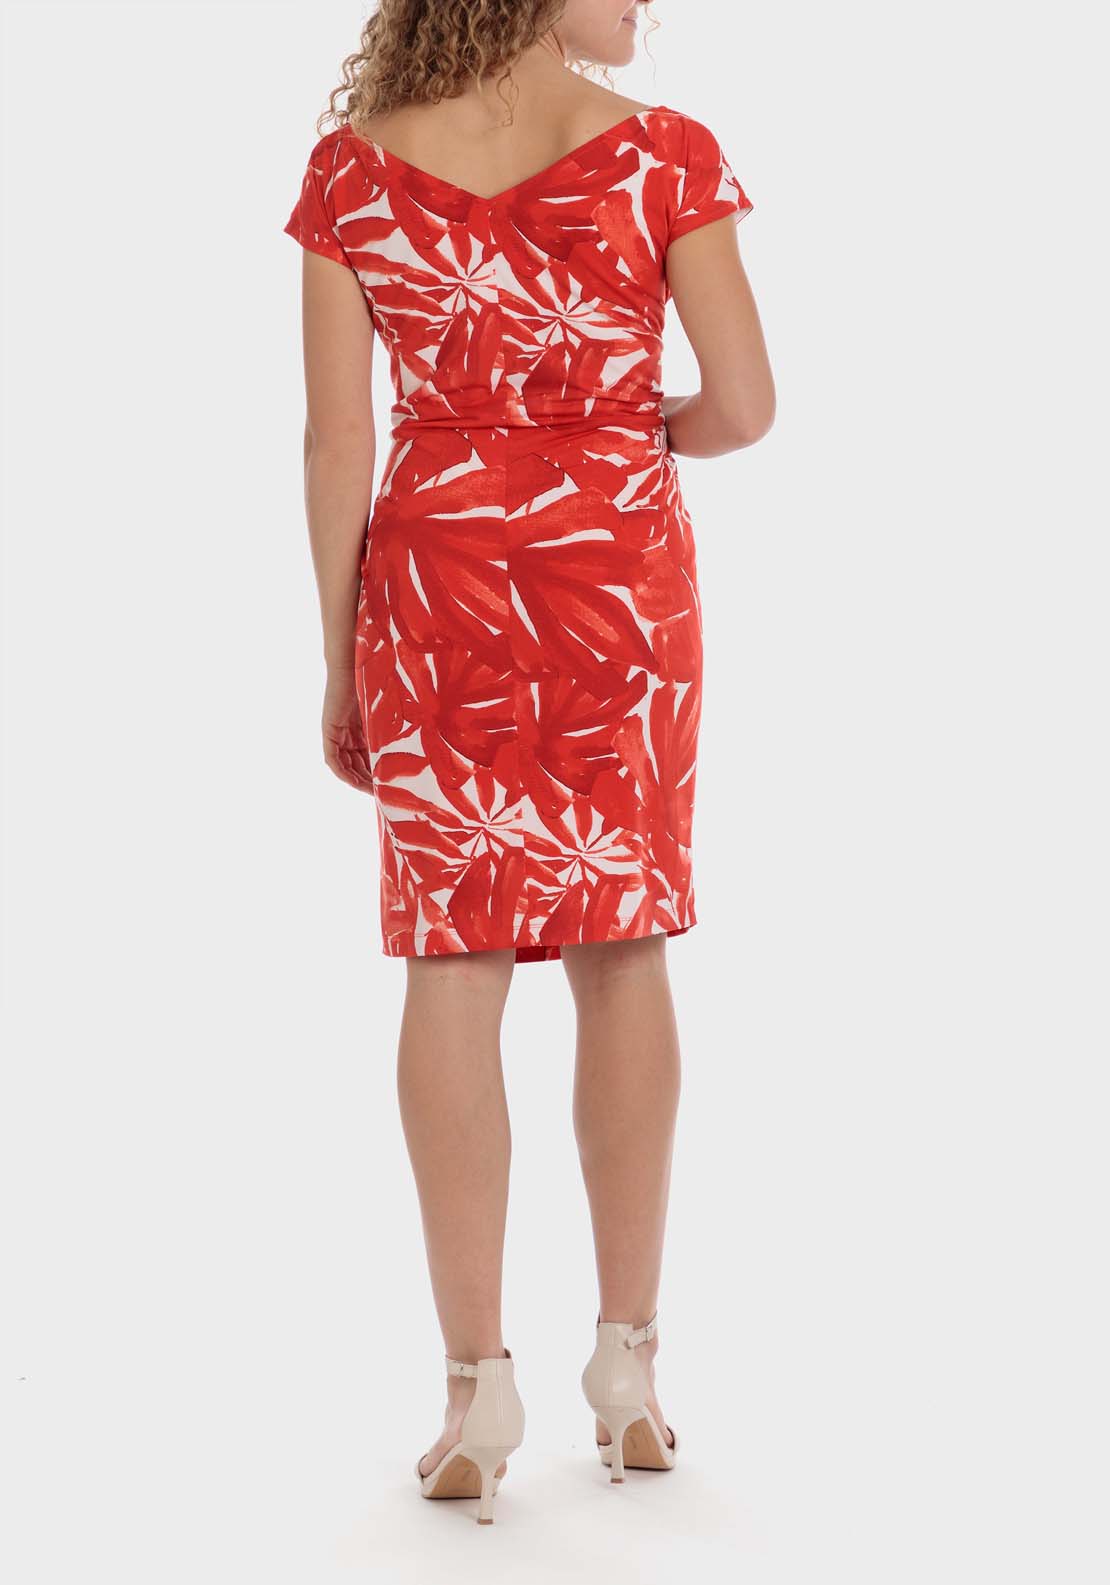 Punt Roma Tropical Print Dress - Red 3 Shaws Department Stores